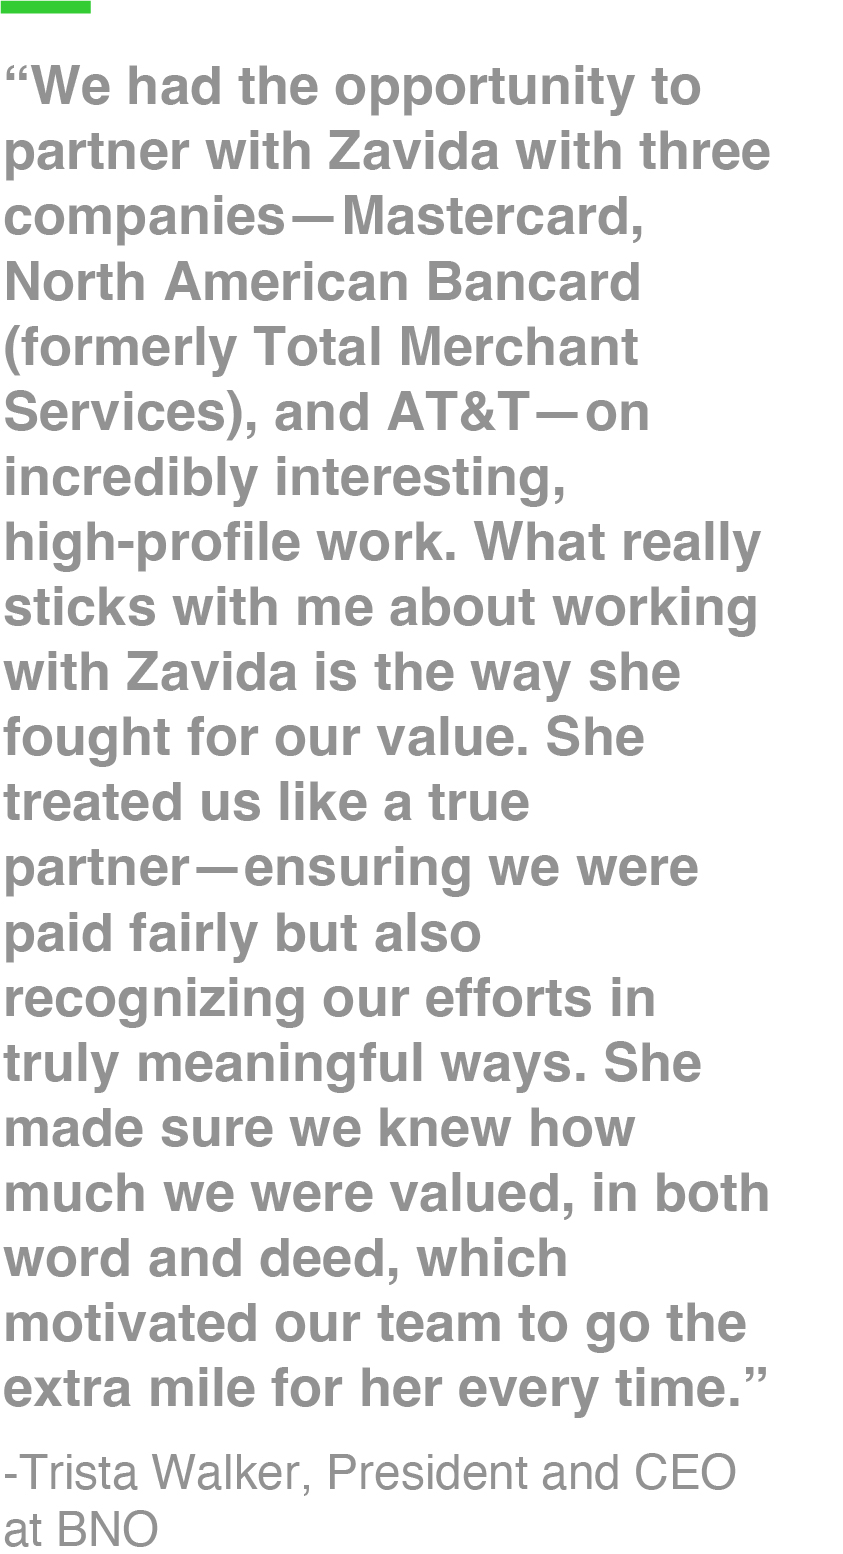 “We had the opportunity to partner with Zavida with three companies—Mastercard, North American Bancard (formerly Total Merchant Services), and AT&T—on incredibly interesting, high-profile work. What really sticks with me about working with Zavida is the way she fought for our value. She treated us like a true partner—ensuring we were paid fairly but also recognizing our efforts in truly meaningful ways. She made sure we knew how much we were valued, in both word and deed, which motivated our team to go the extra mile for her every time.” -Trista Walker, President and CEO at BNO